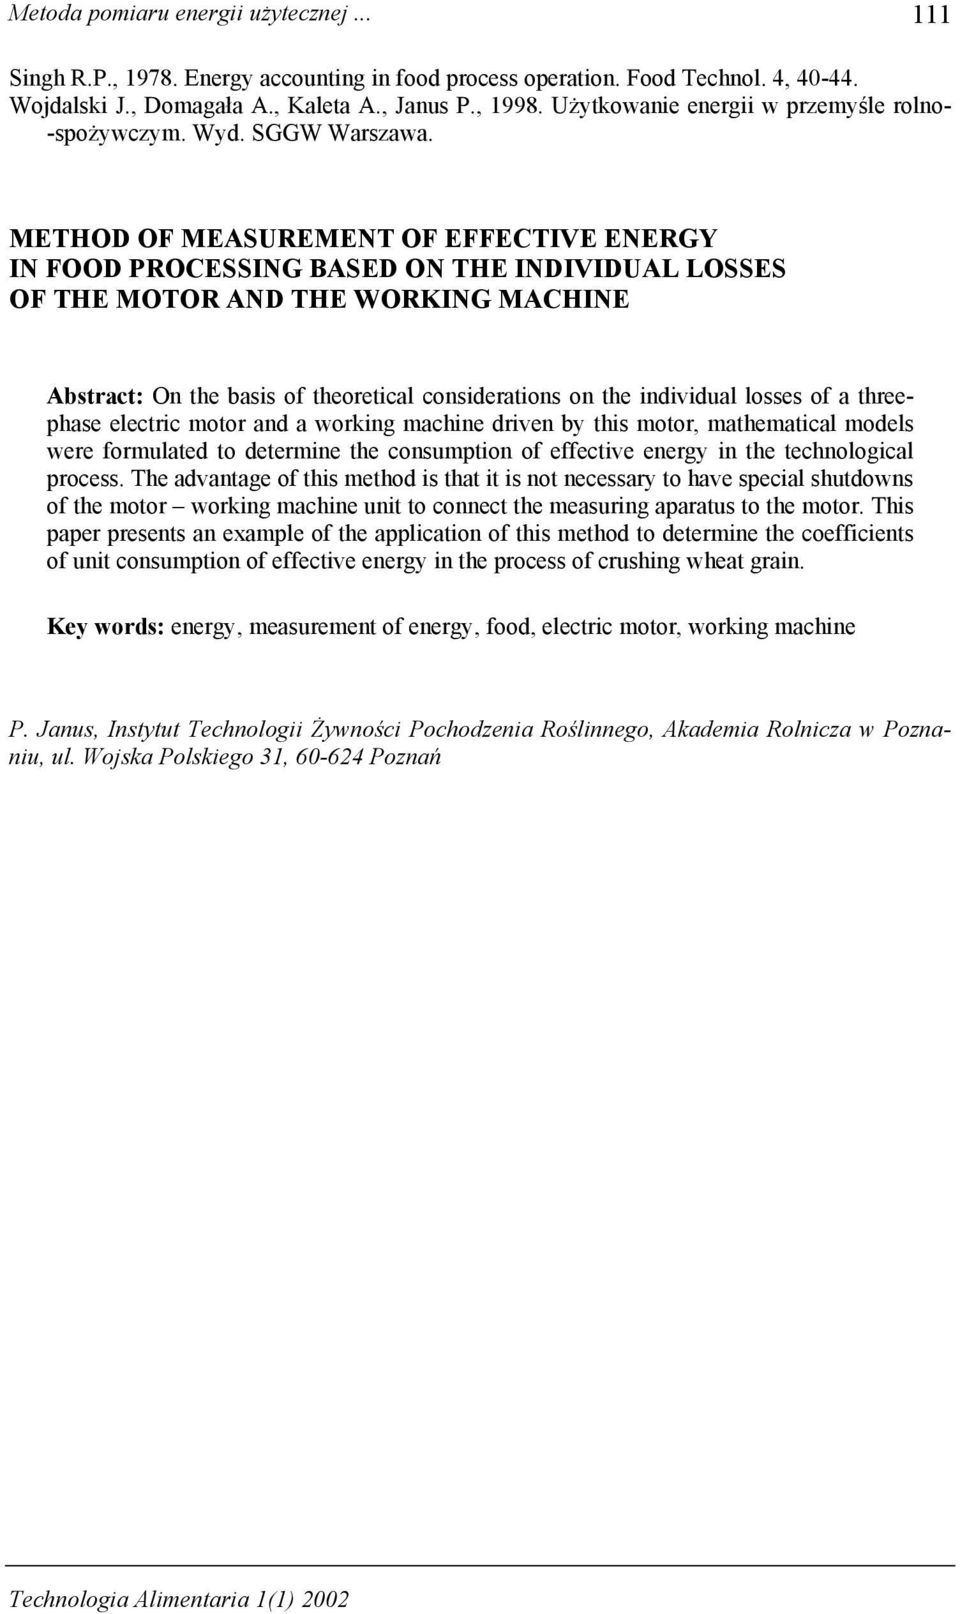 METHOD OF MEASUREMENT OF EFFECTIVE ENERGY IN FOOD PROCESSING BASED ON THE INDIVIDUAL LOSSES OF THE MOTOR AND THE WORKING MACHINE Abstract: On the basis f theretical cnsideratins n the individual